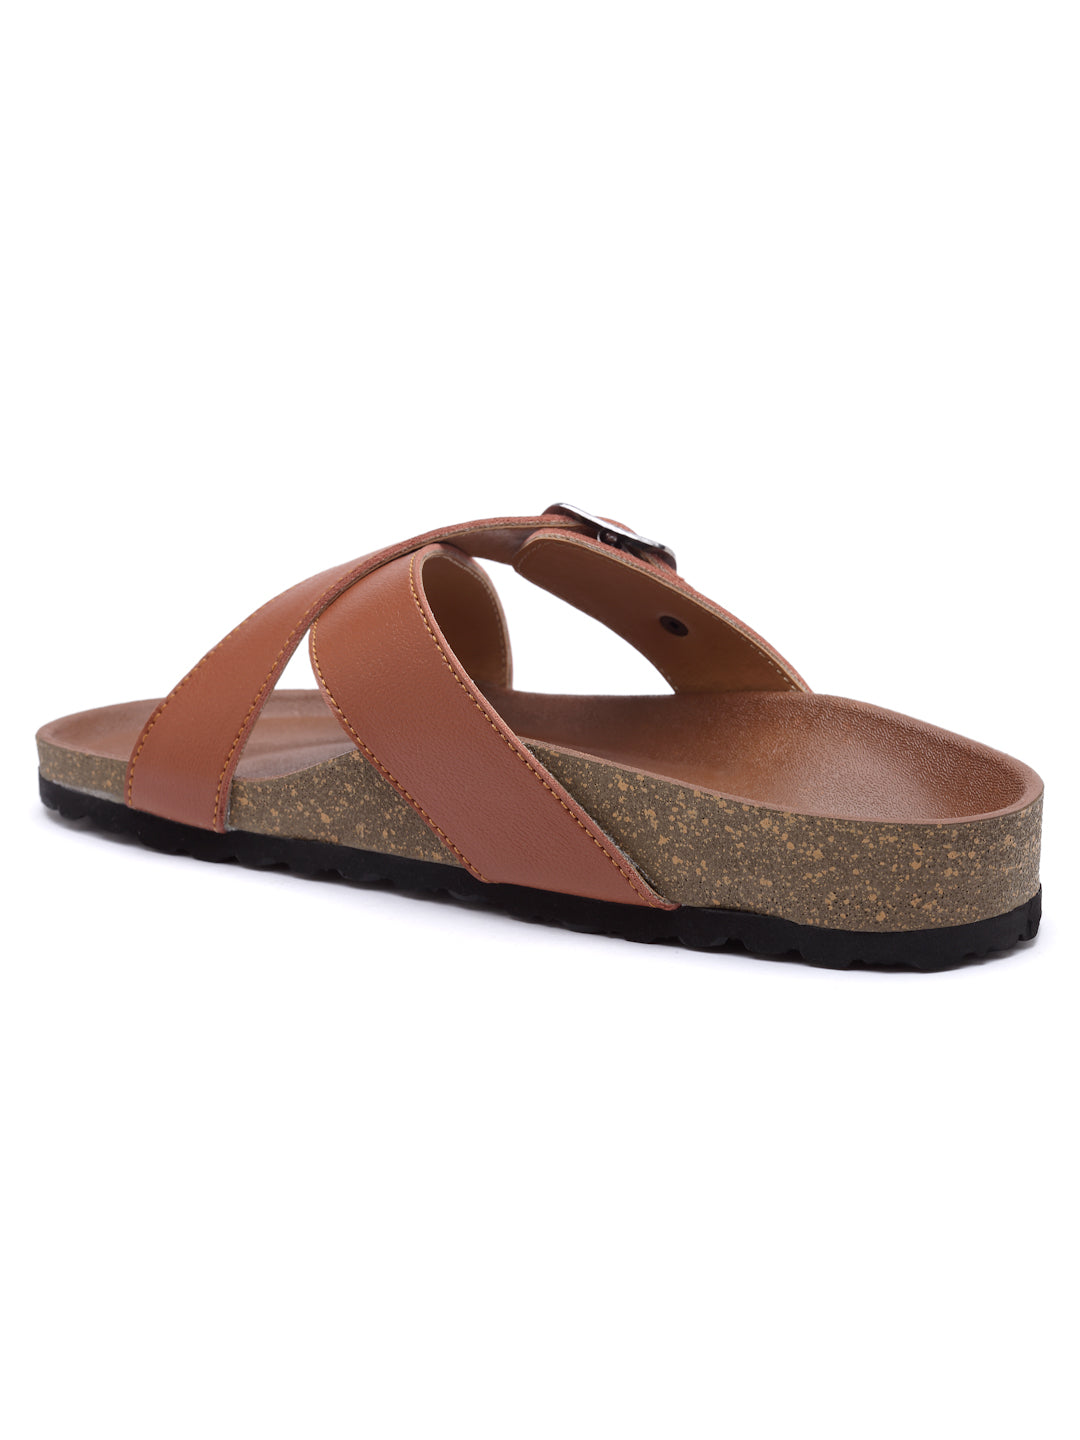 Women's Stylish Light Brown Synthetic Leather Casual Sandal